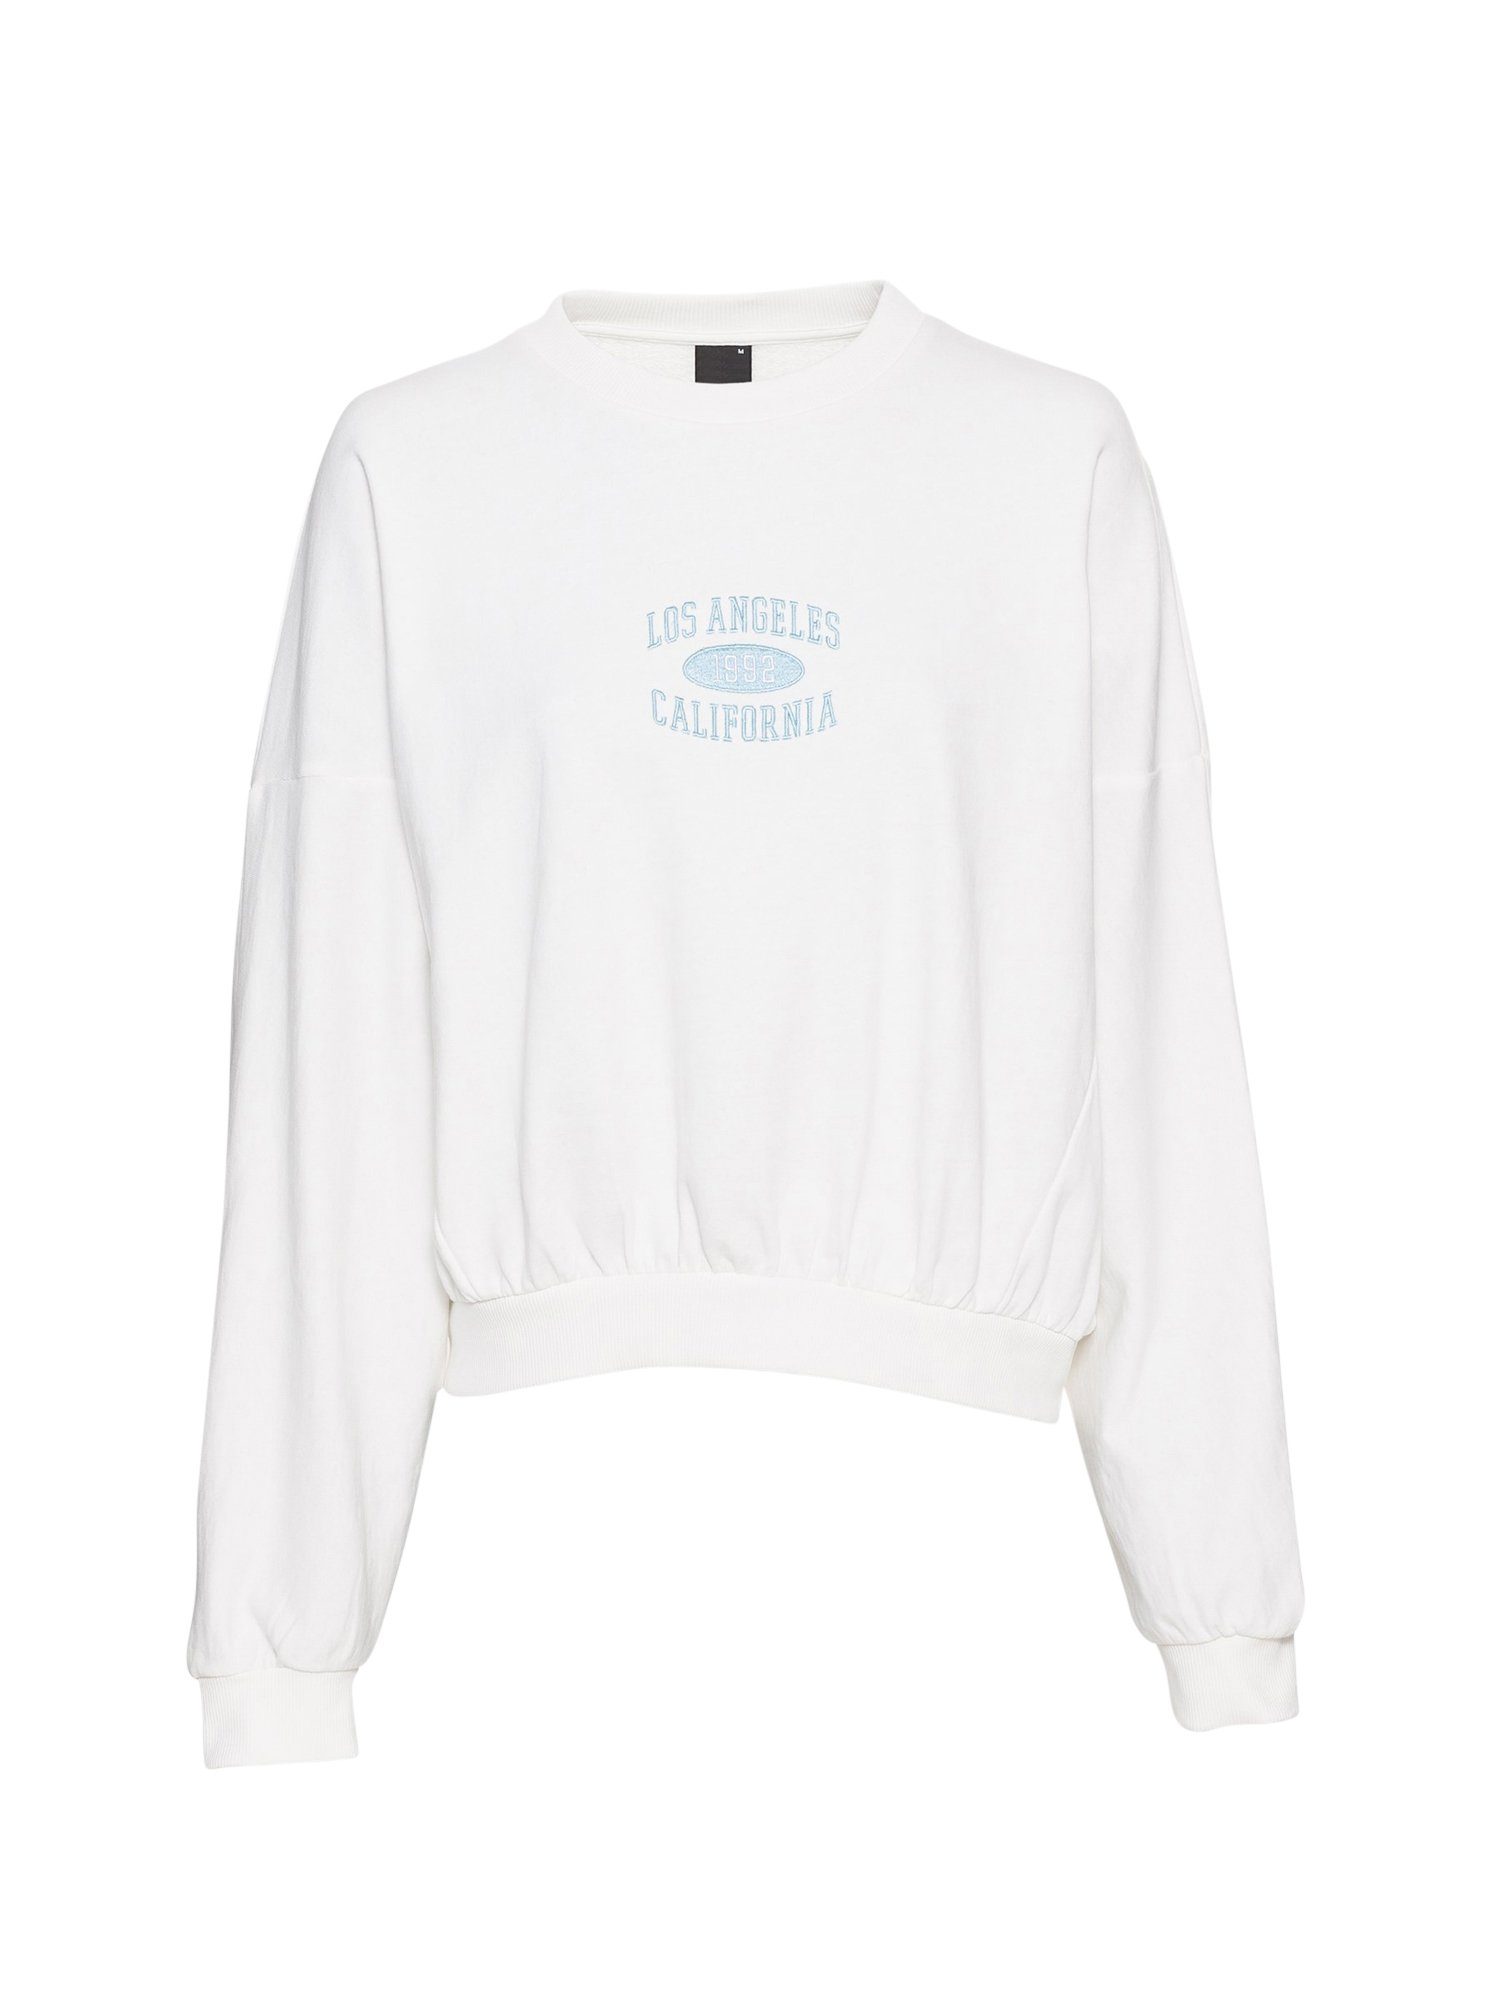 Freshlions Sweater Pullover Eve Gina Tricot Creme